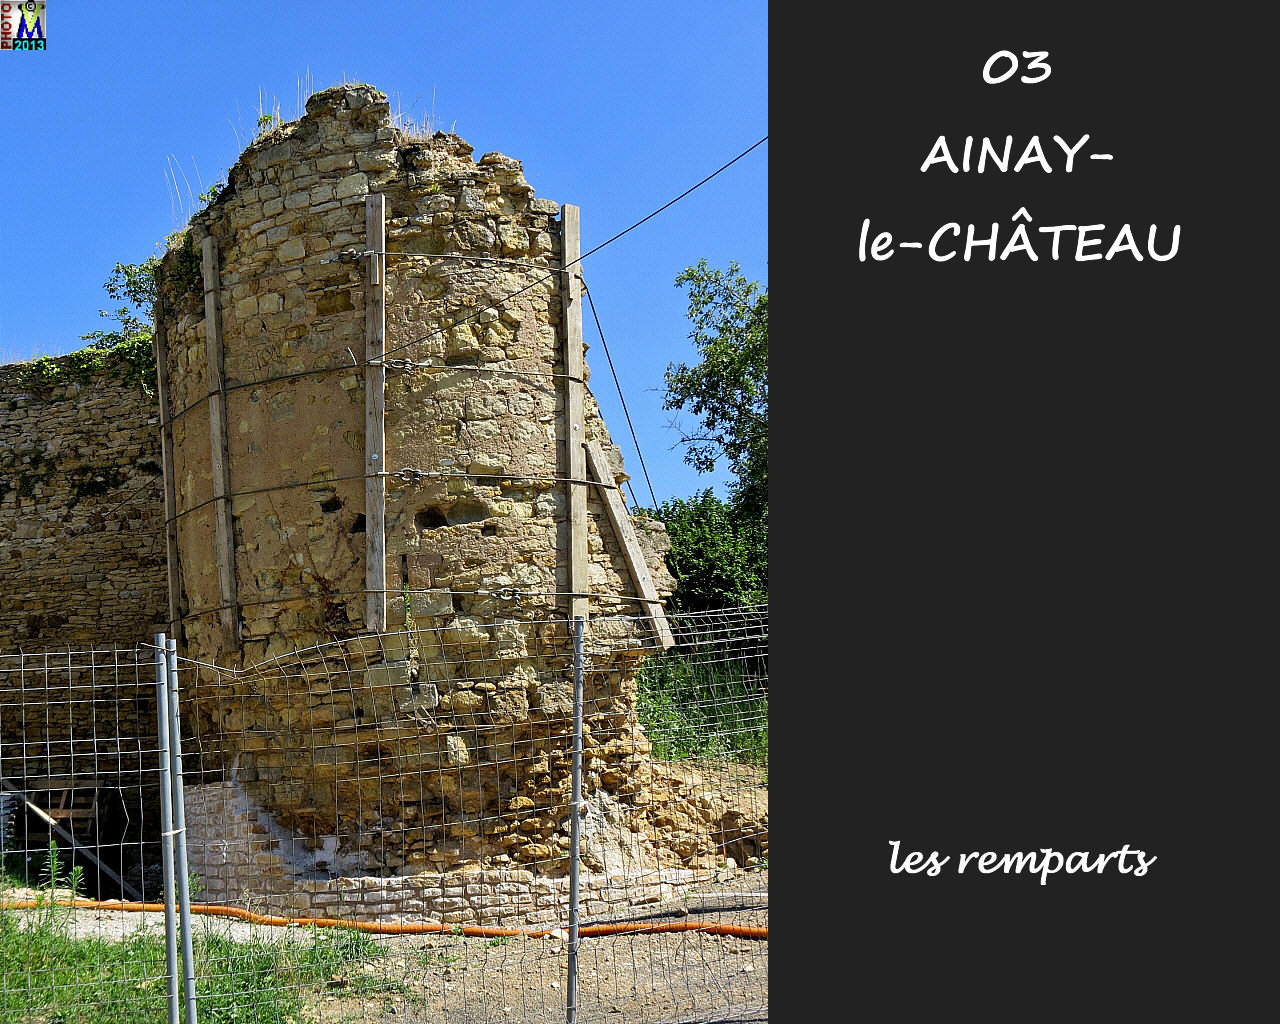 03AINAY-CHATEAU_remparts_102.jpg